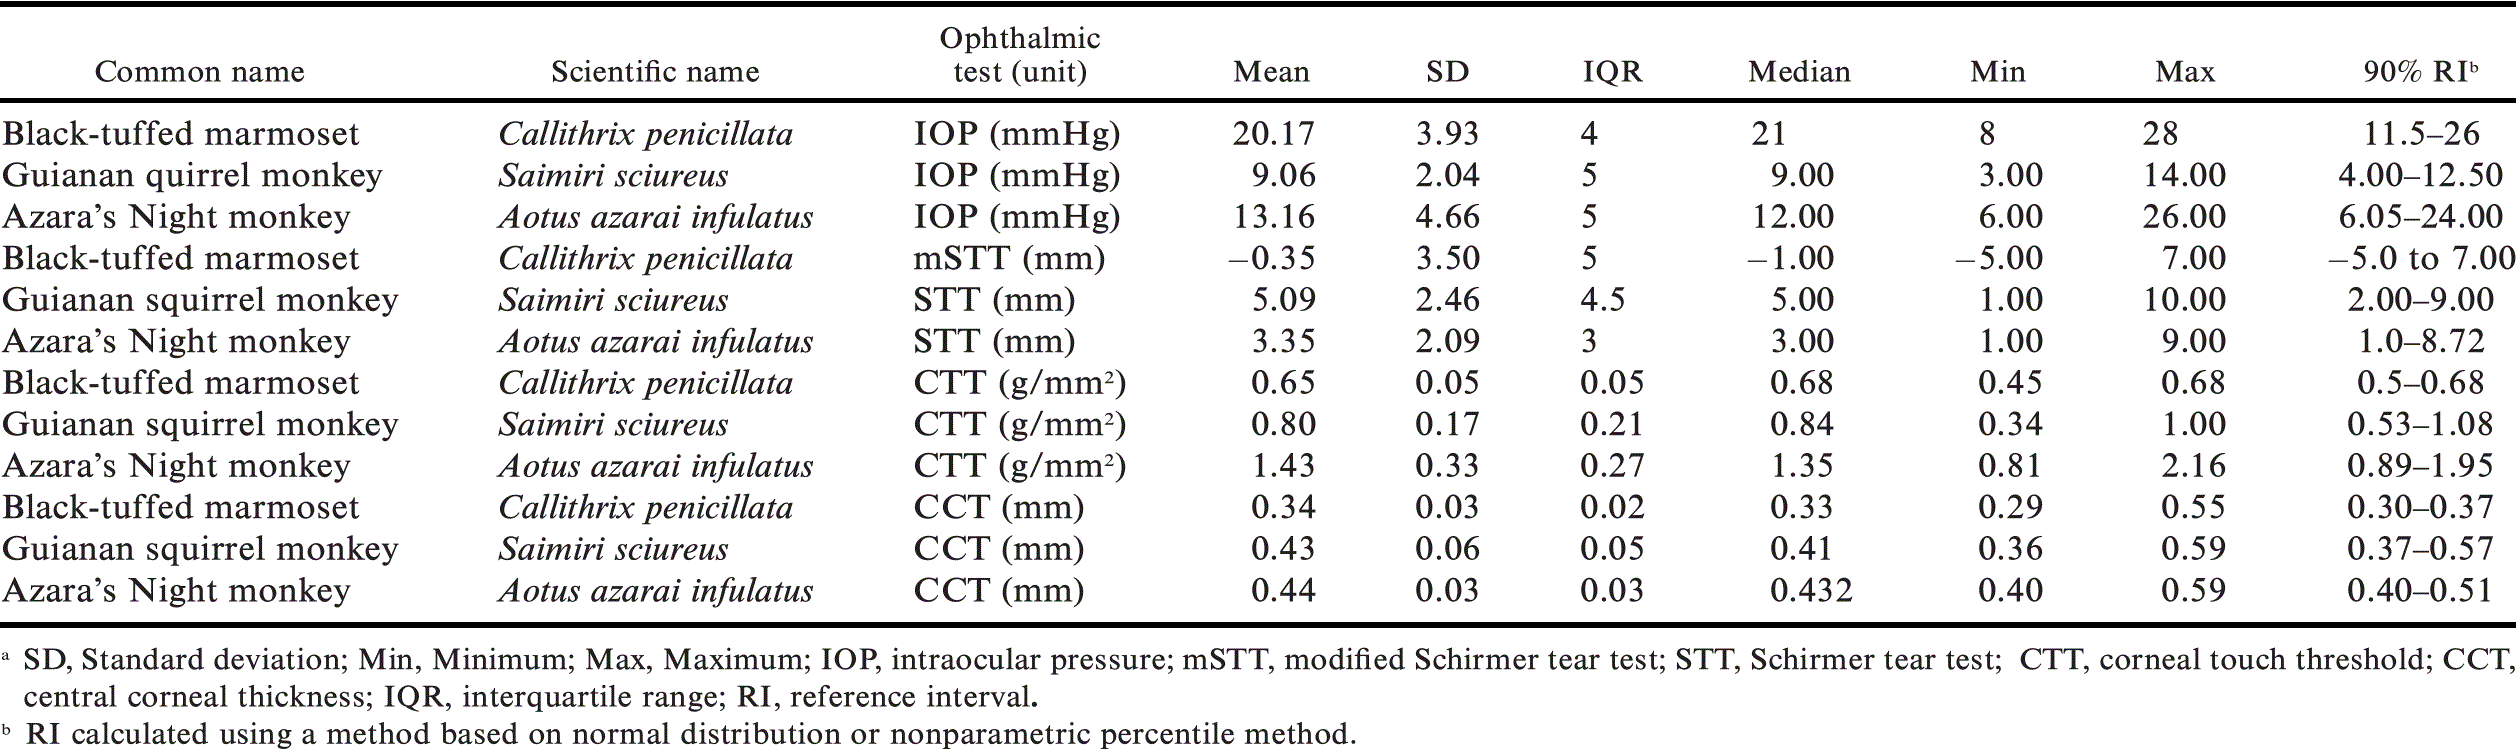 SELECTED OPHTHALMIC TESTS AND OCULAR DIMENSIONS IN RELATION TO ACTIVITY ...